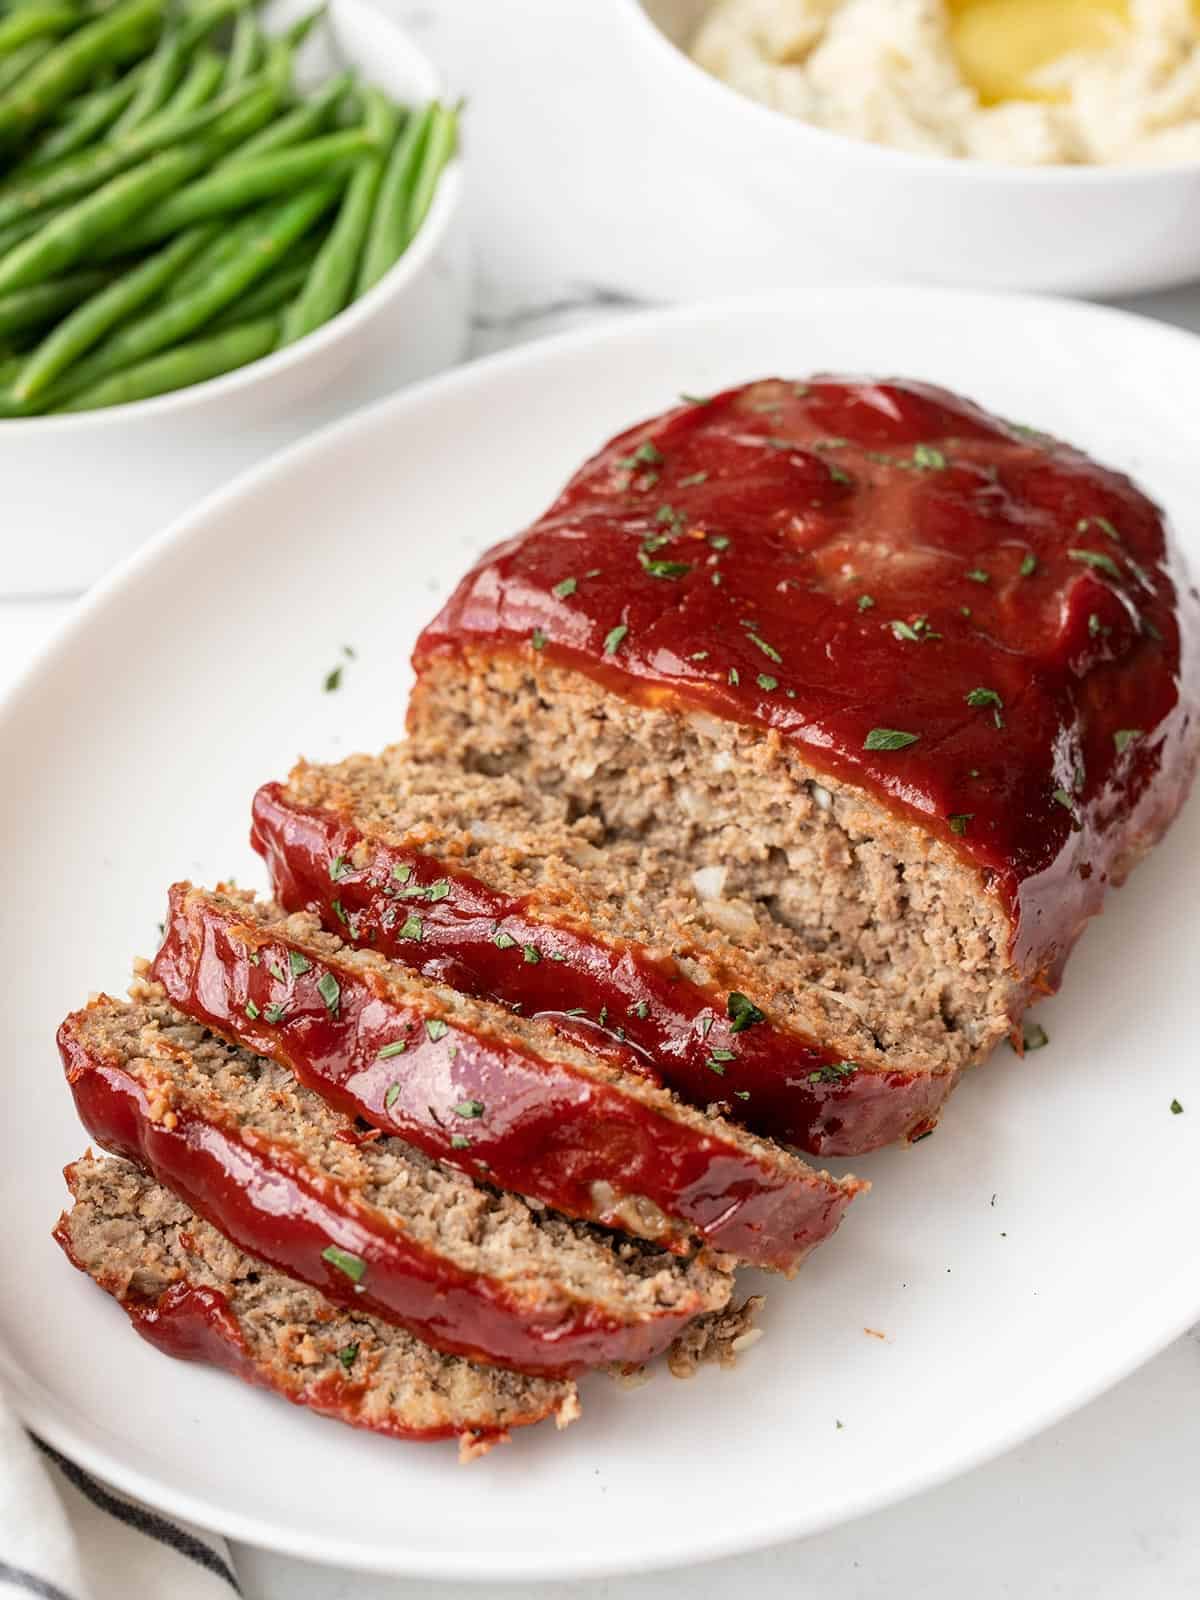 Side view of sliced meatloaf on a platter, side dishes in the background